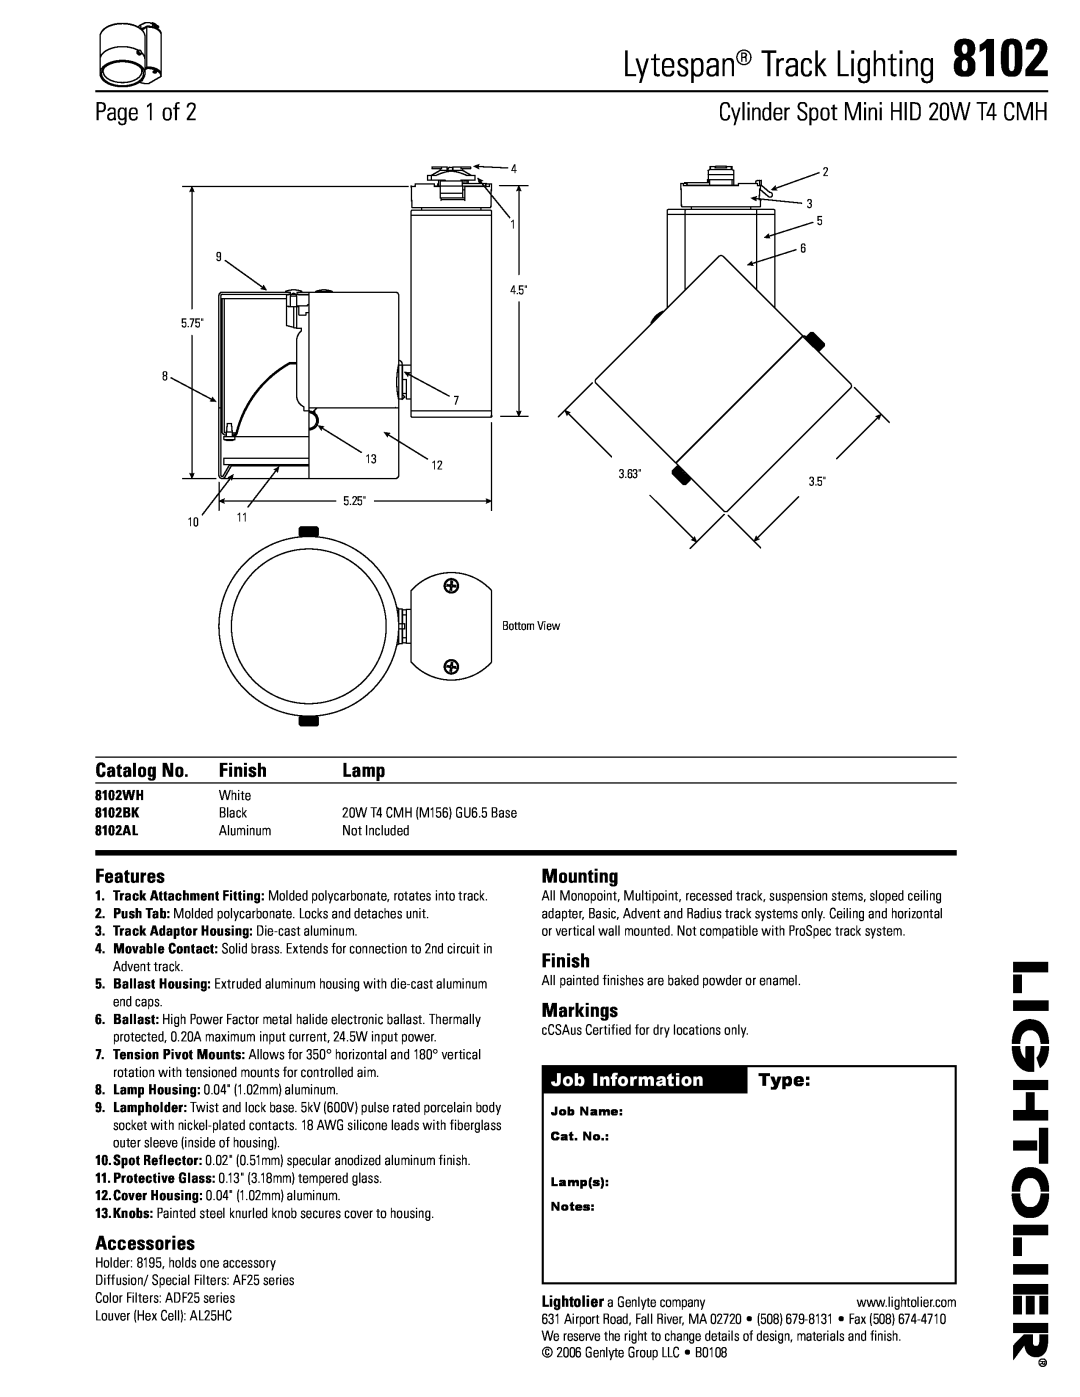 Lightolier 8102 manual Catalog No, Finish, Lamp, Features, Accessories, Mounting, Markings, Job Information, Type, Page of 